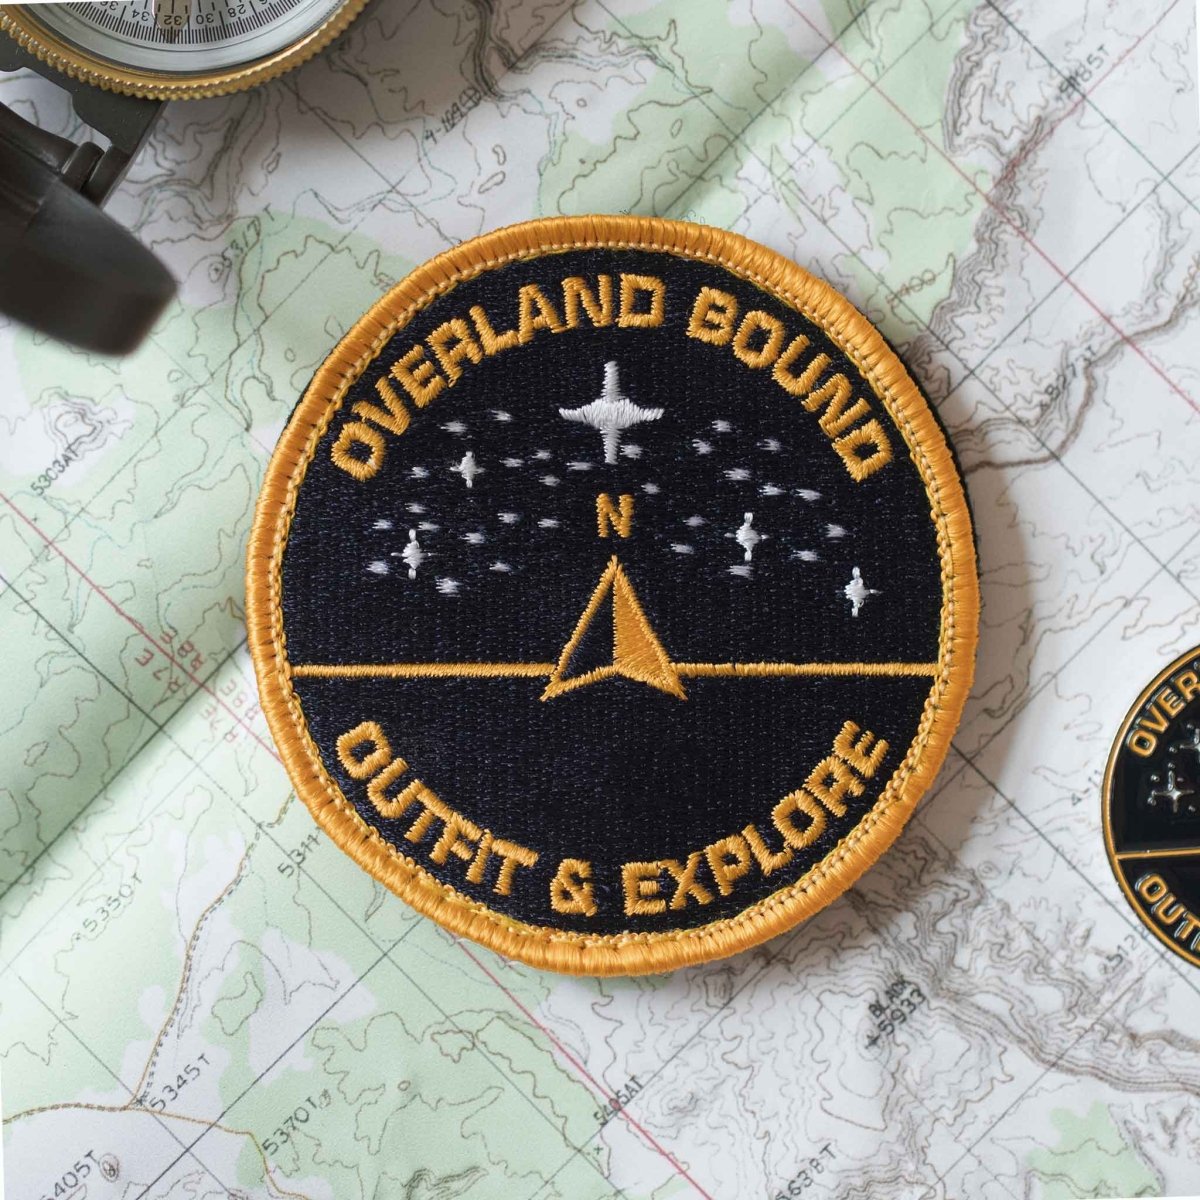 Find Your North Patch - Overland Bound